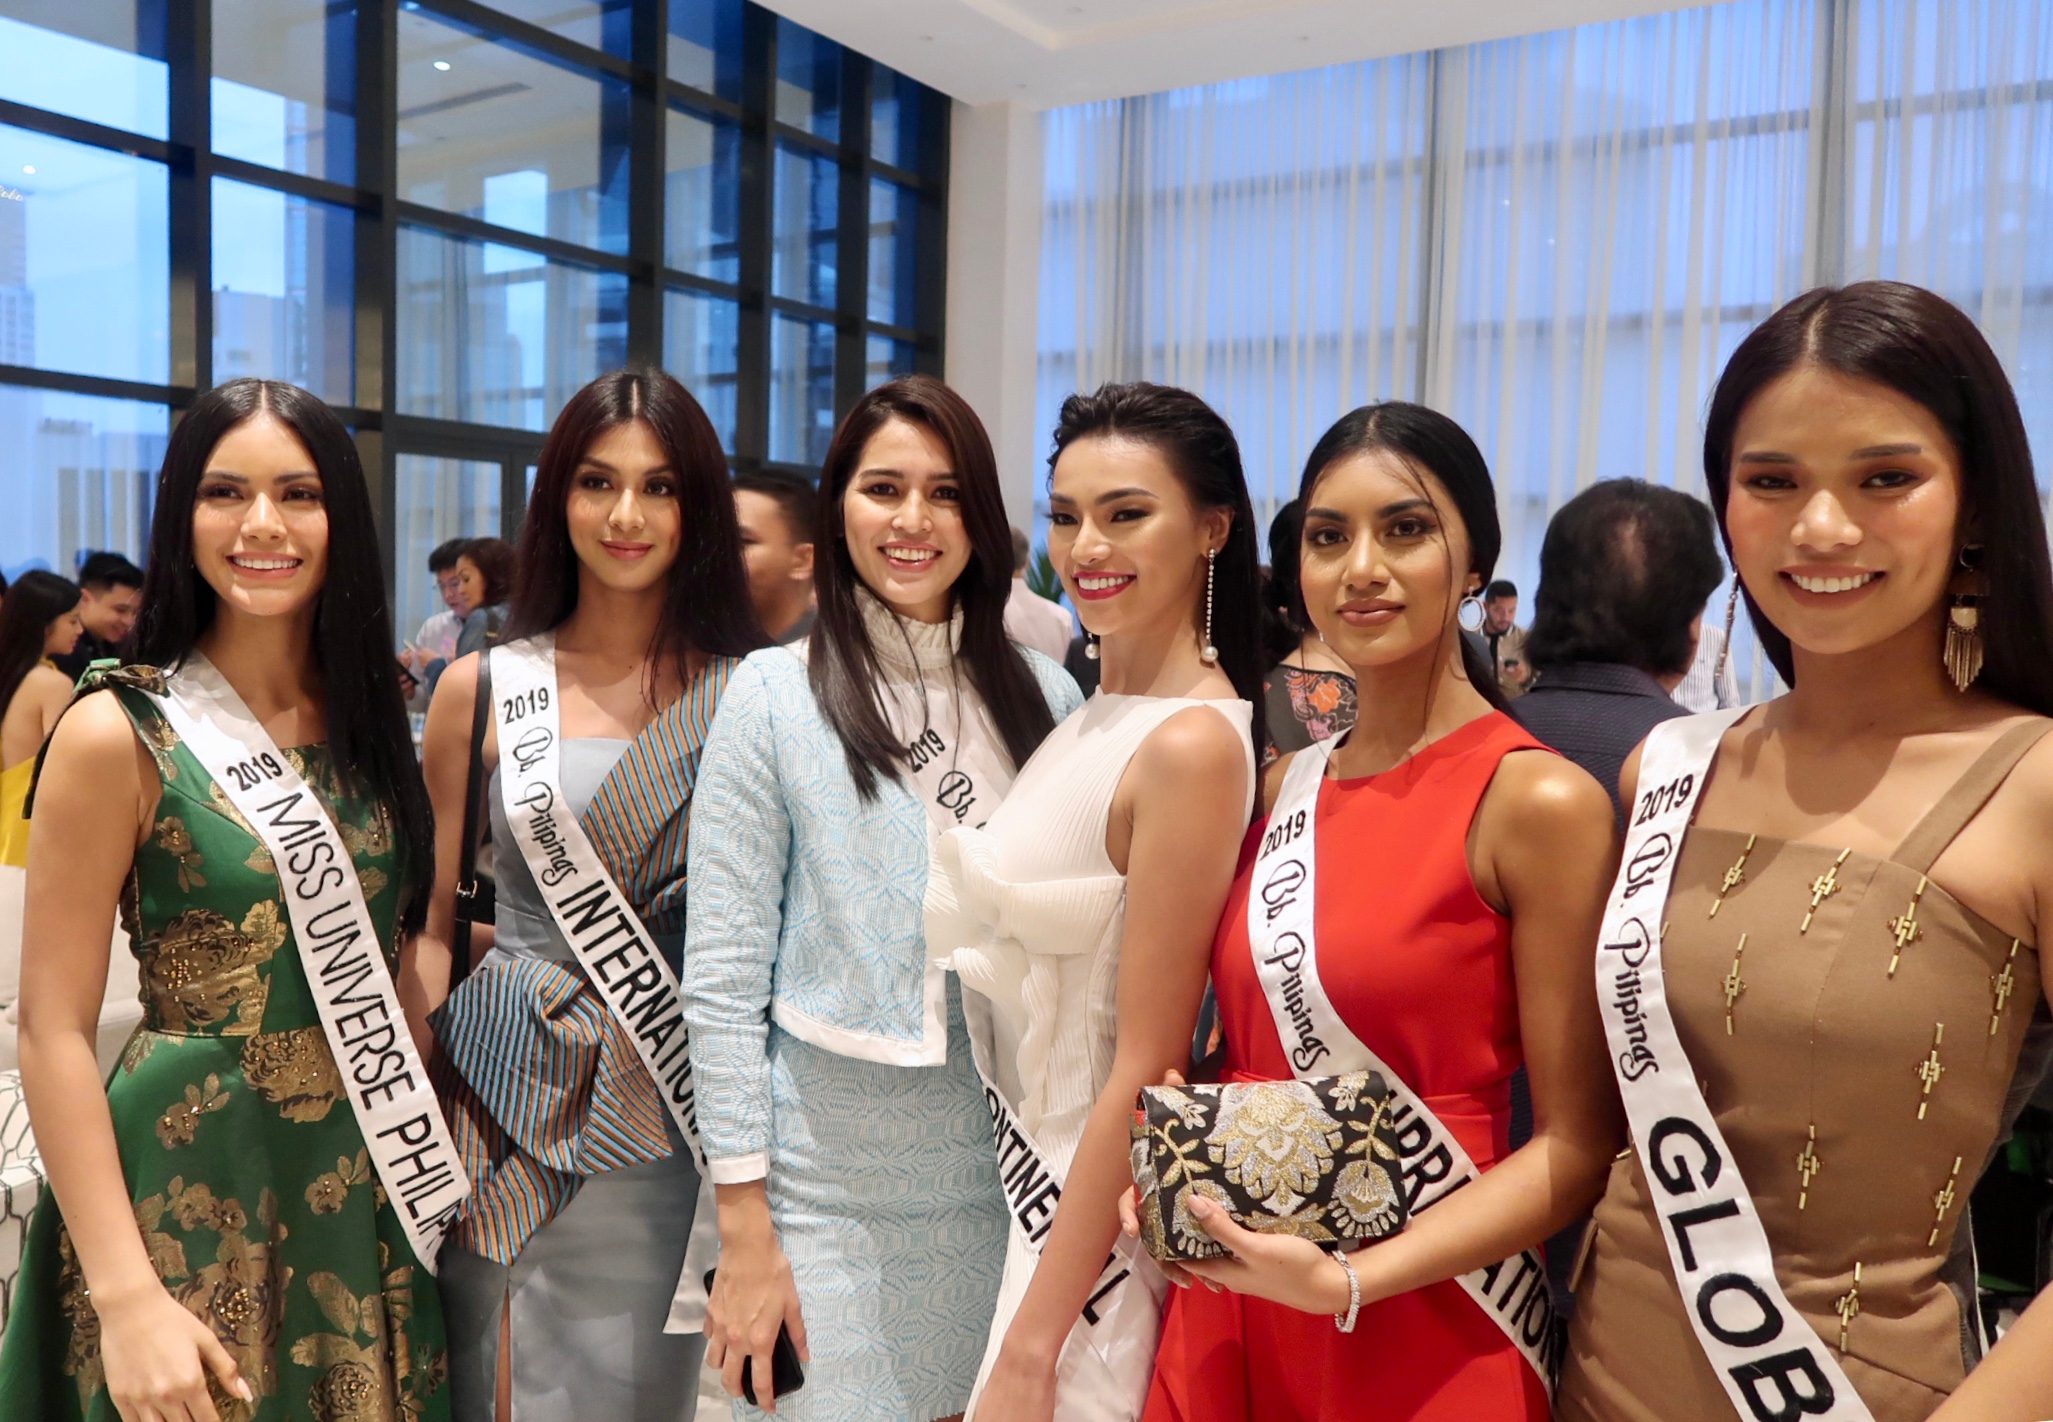 BEAUTIES IN ATTENDANCE. The 2019 Bb Pilipinas queens attend the opening of the exhibit to show support to Bernardo. Photo by Voltaire Tayag/Rappler 